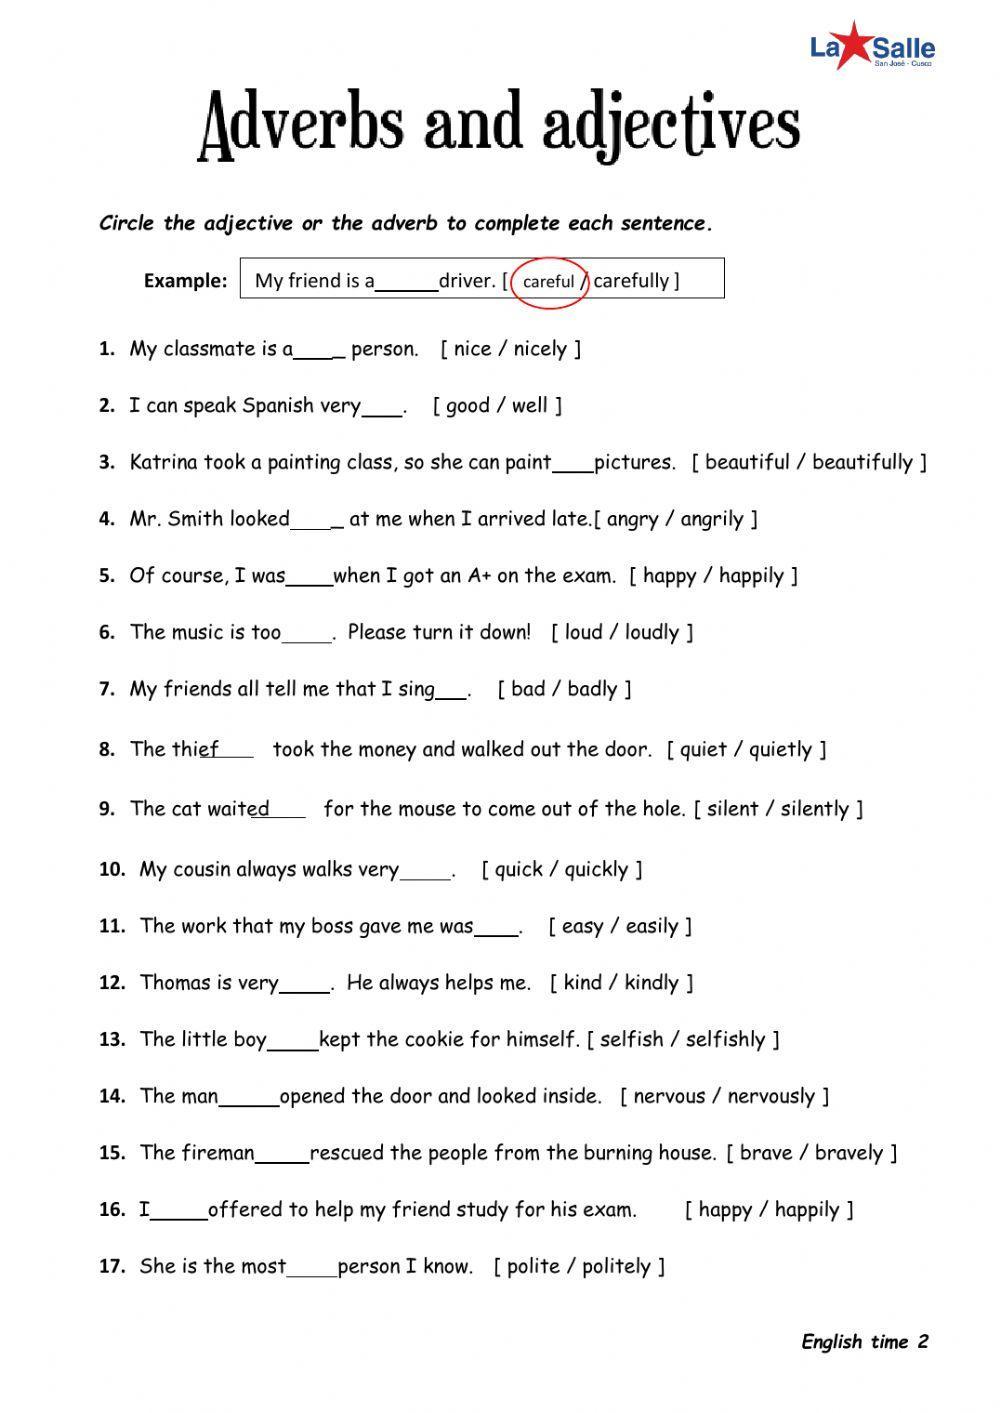 Adjectives and adverbs